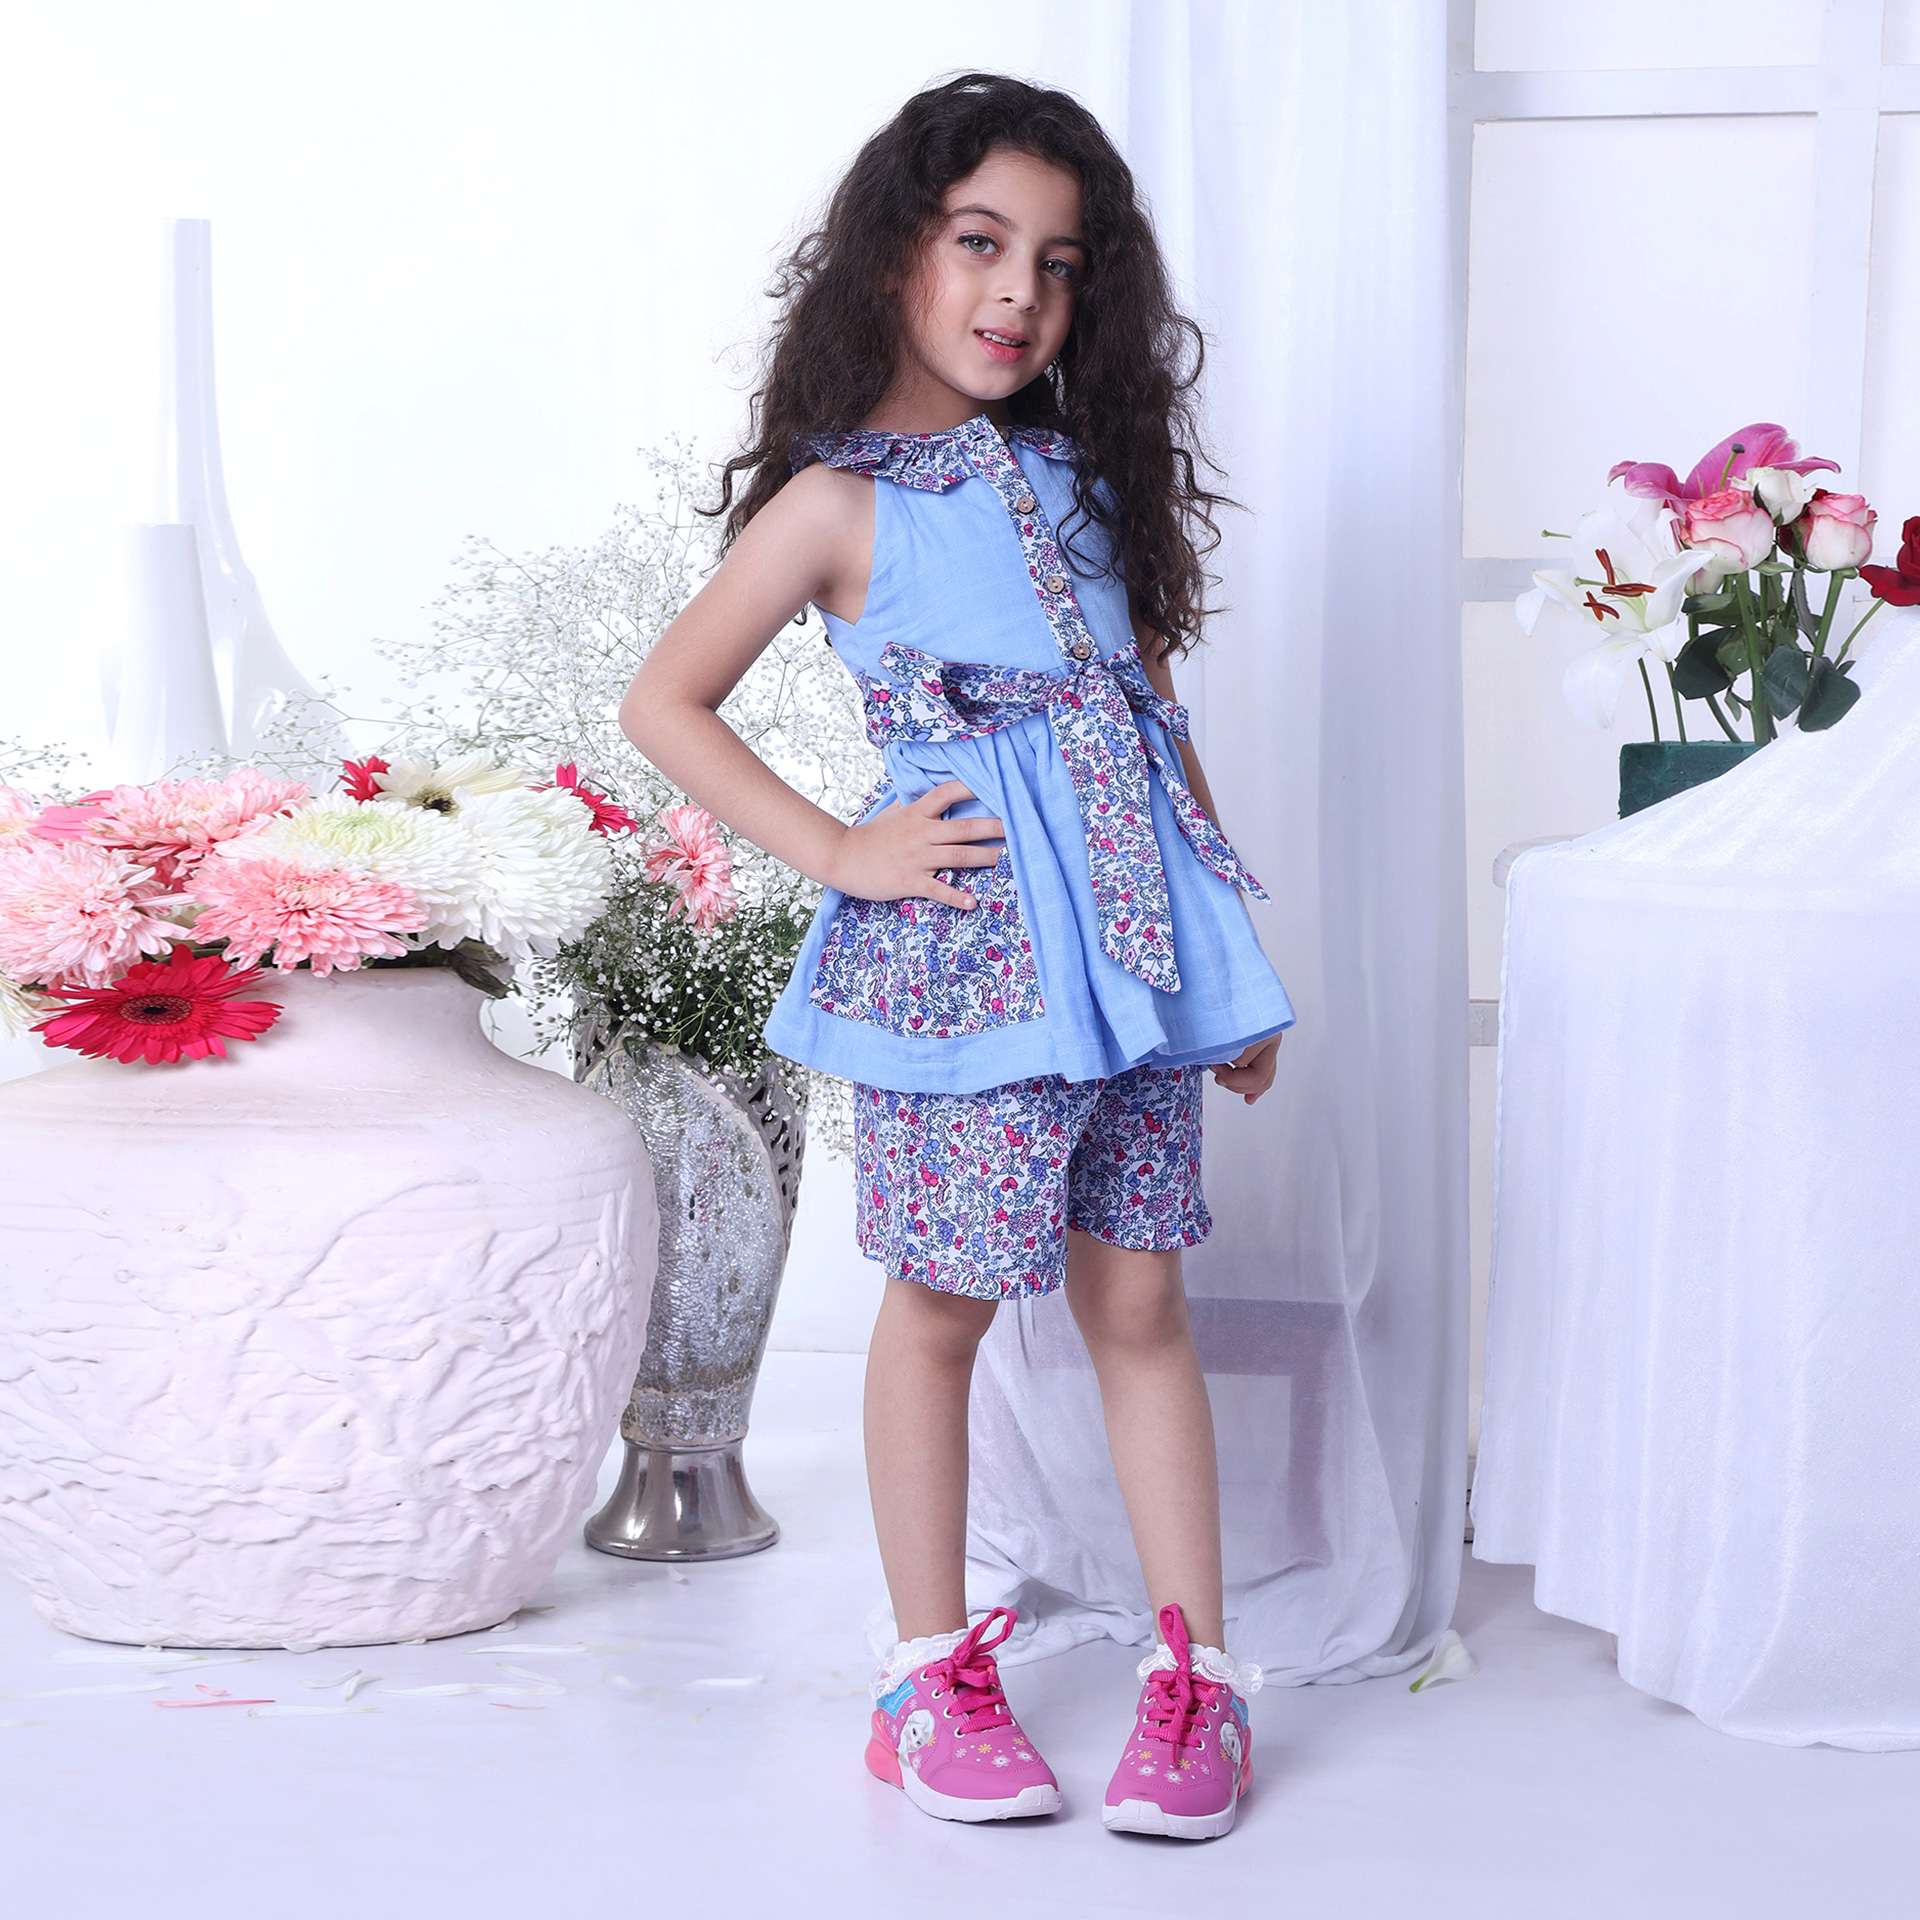 A young girl wearing blue gauze blouse with cutaway shoulders with floral trims, tie-up belt and matched floral shorts